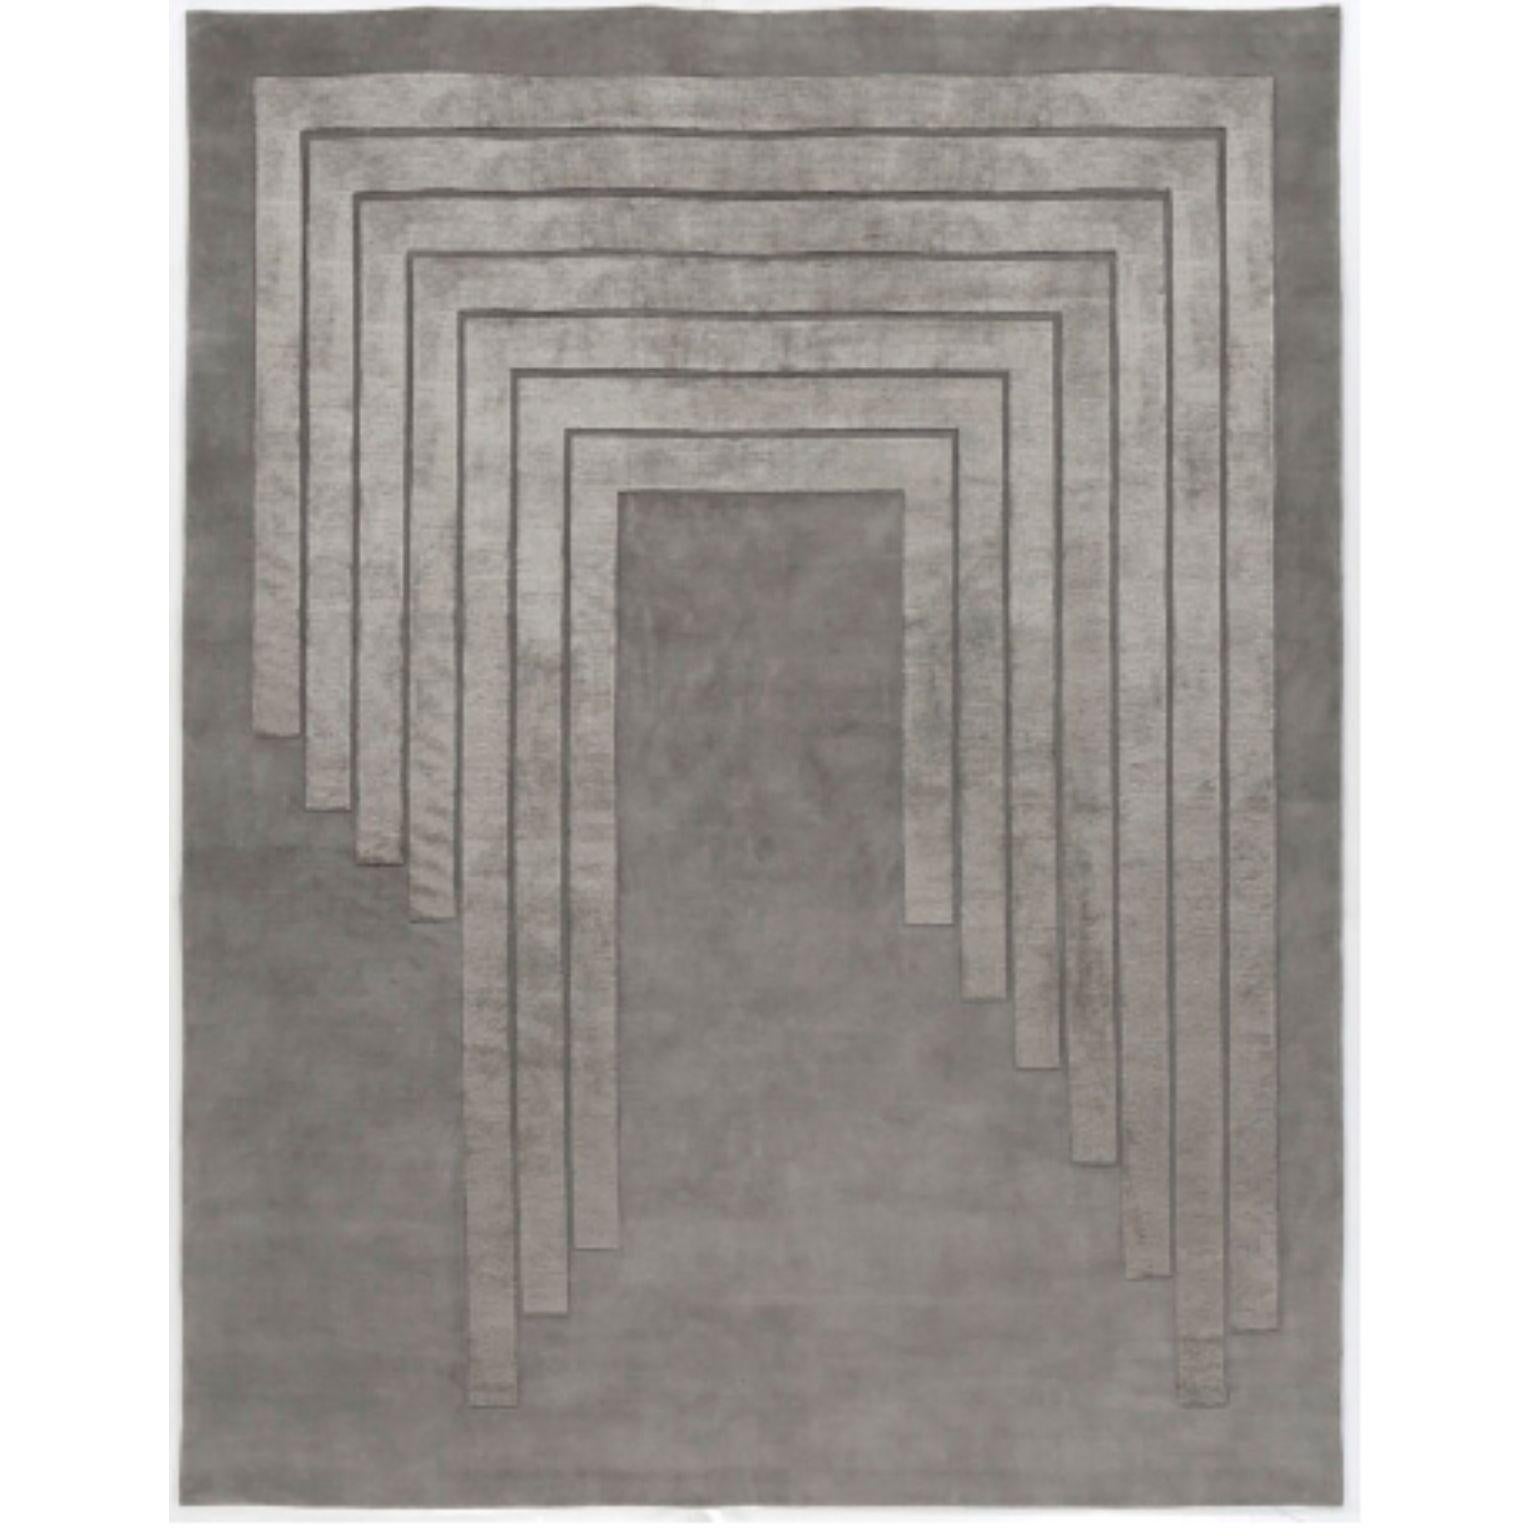 OTTO 200 rug by Illulian
Dimensions: D300 x H200 cm 
Materials: Wool 50%, Silk 50%
Variations available and prices may vary according to materials and sizes. 

Illulian, historic and prestigious rug company brand, internationally renowned in